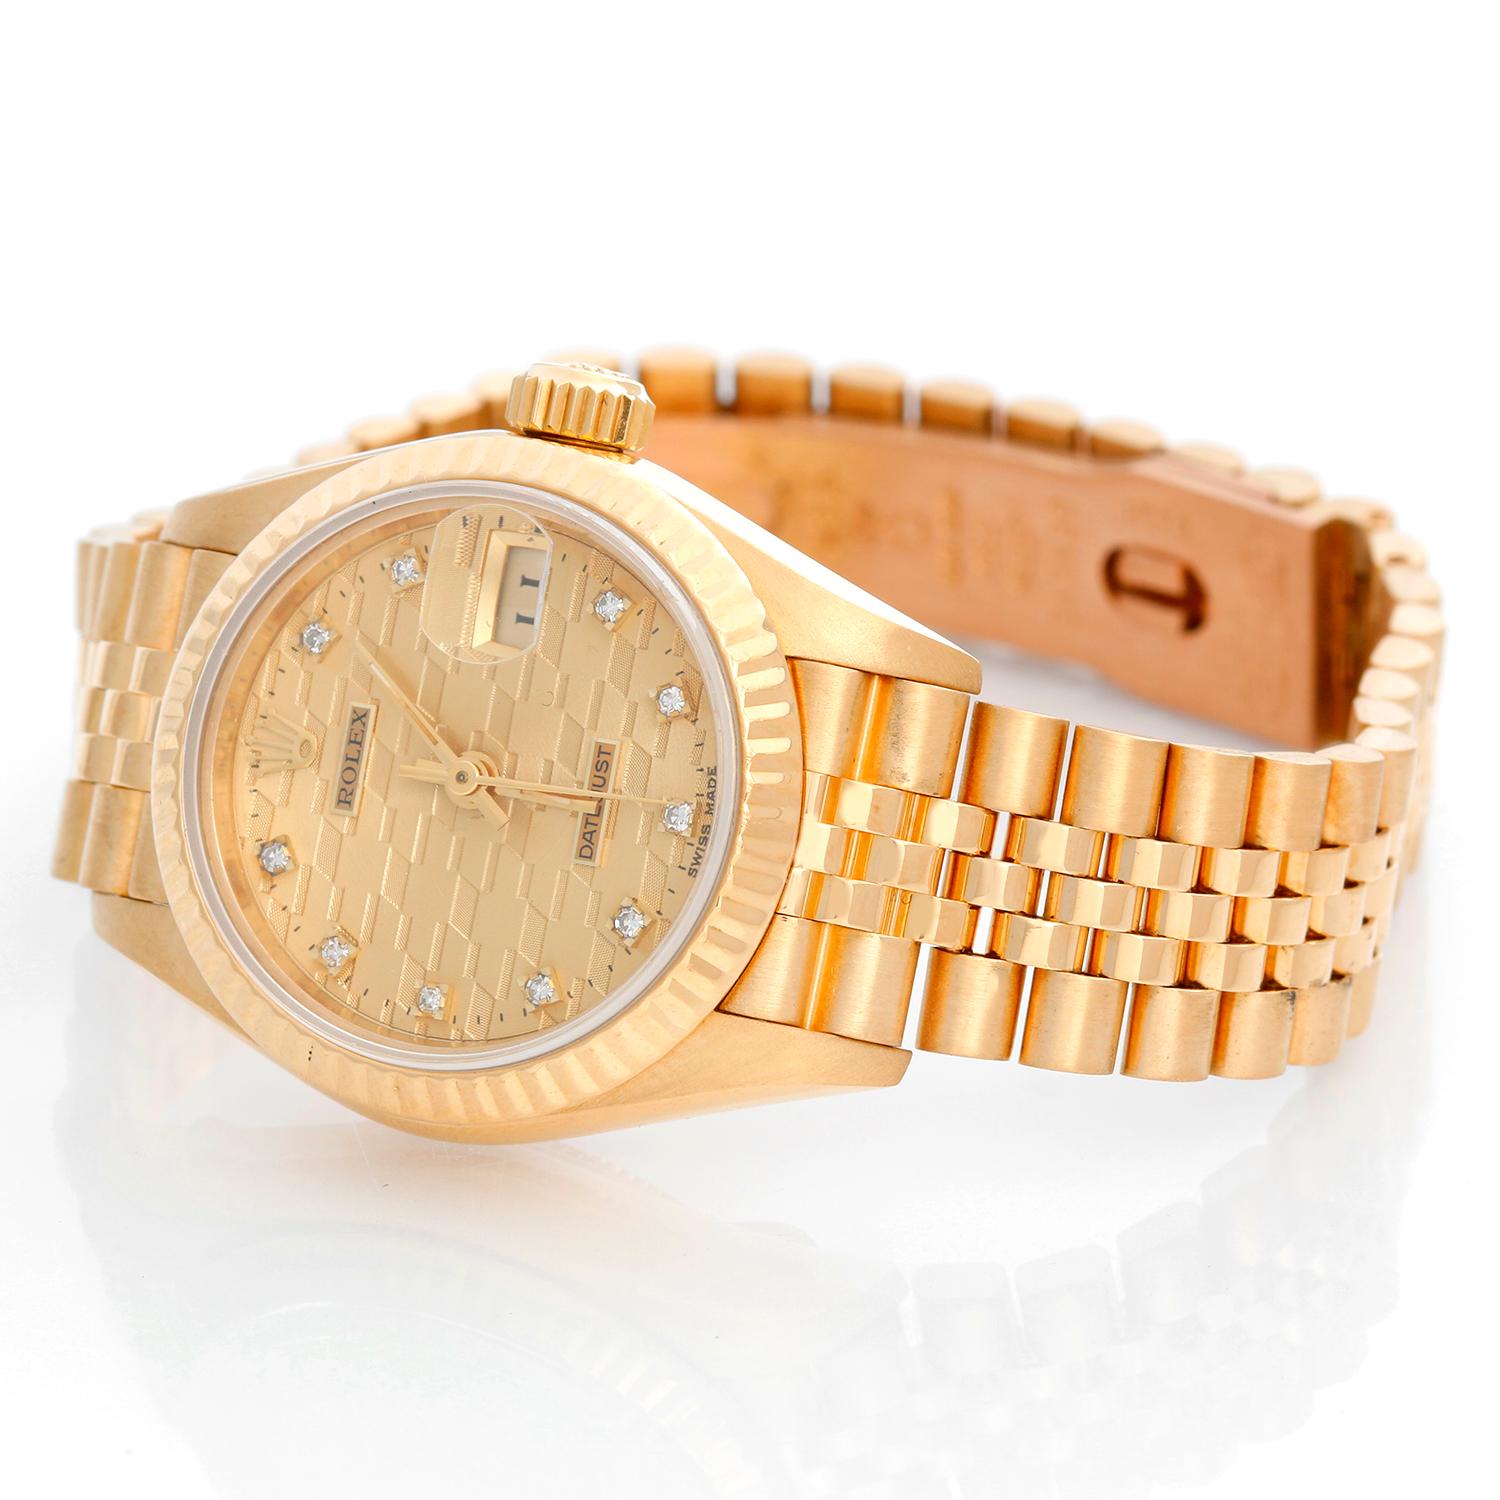 Rolex President Ladies 18k Yellow Gold Watch 69178 - Automatic winding, 29 jewels, Quickset date, sapphire crystal. 18k yellow gold case with fluted bezel (26mm diameter). Champagne Chevy Diamond dial . 18k yellow gold hidden-clasp President